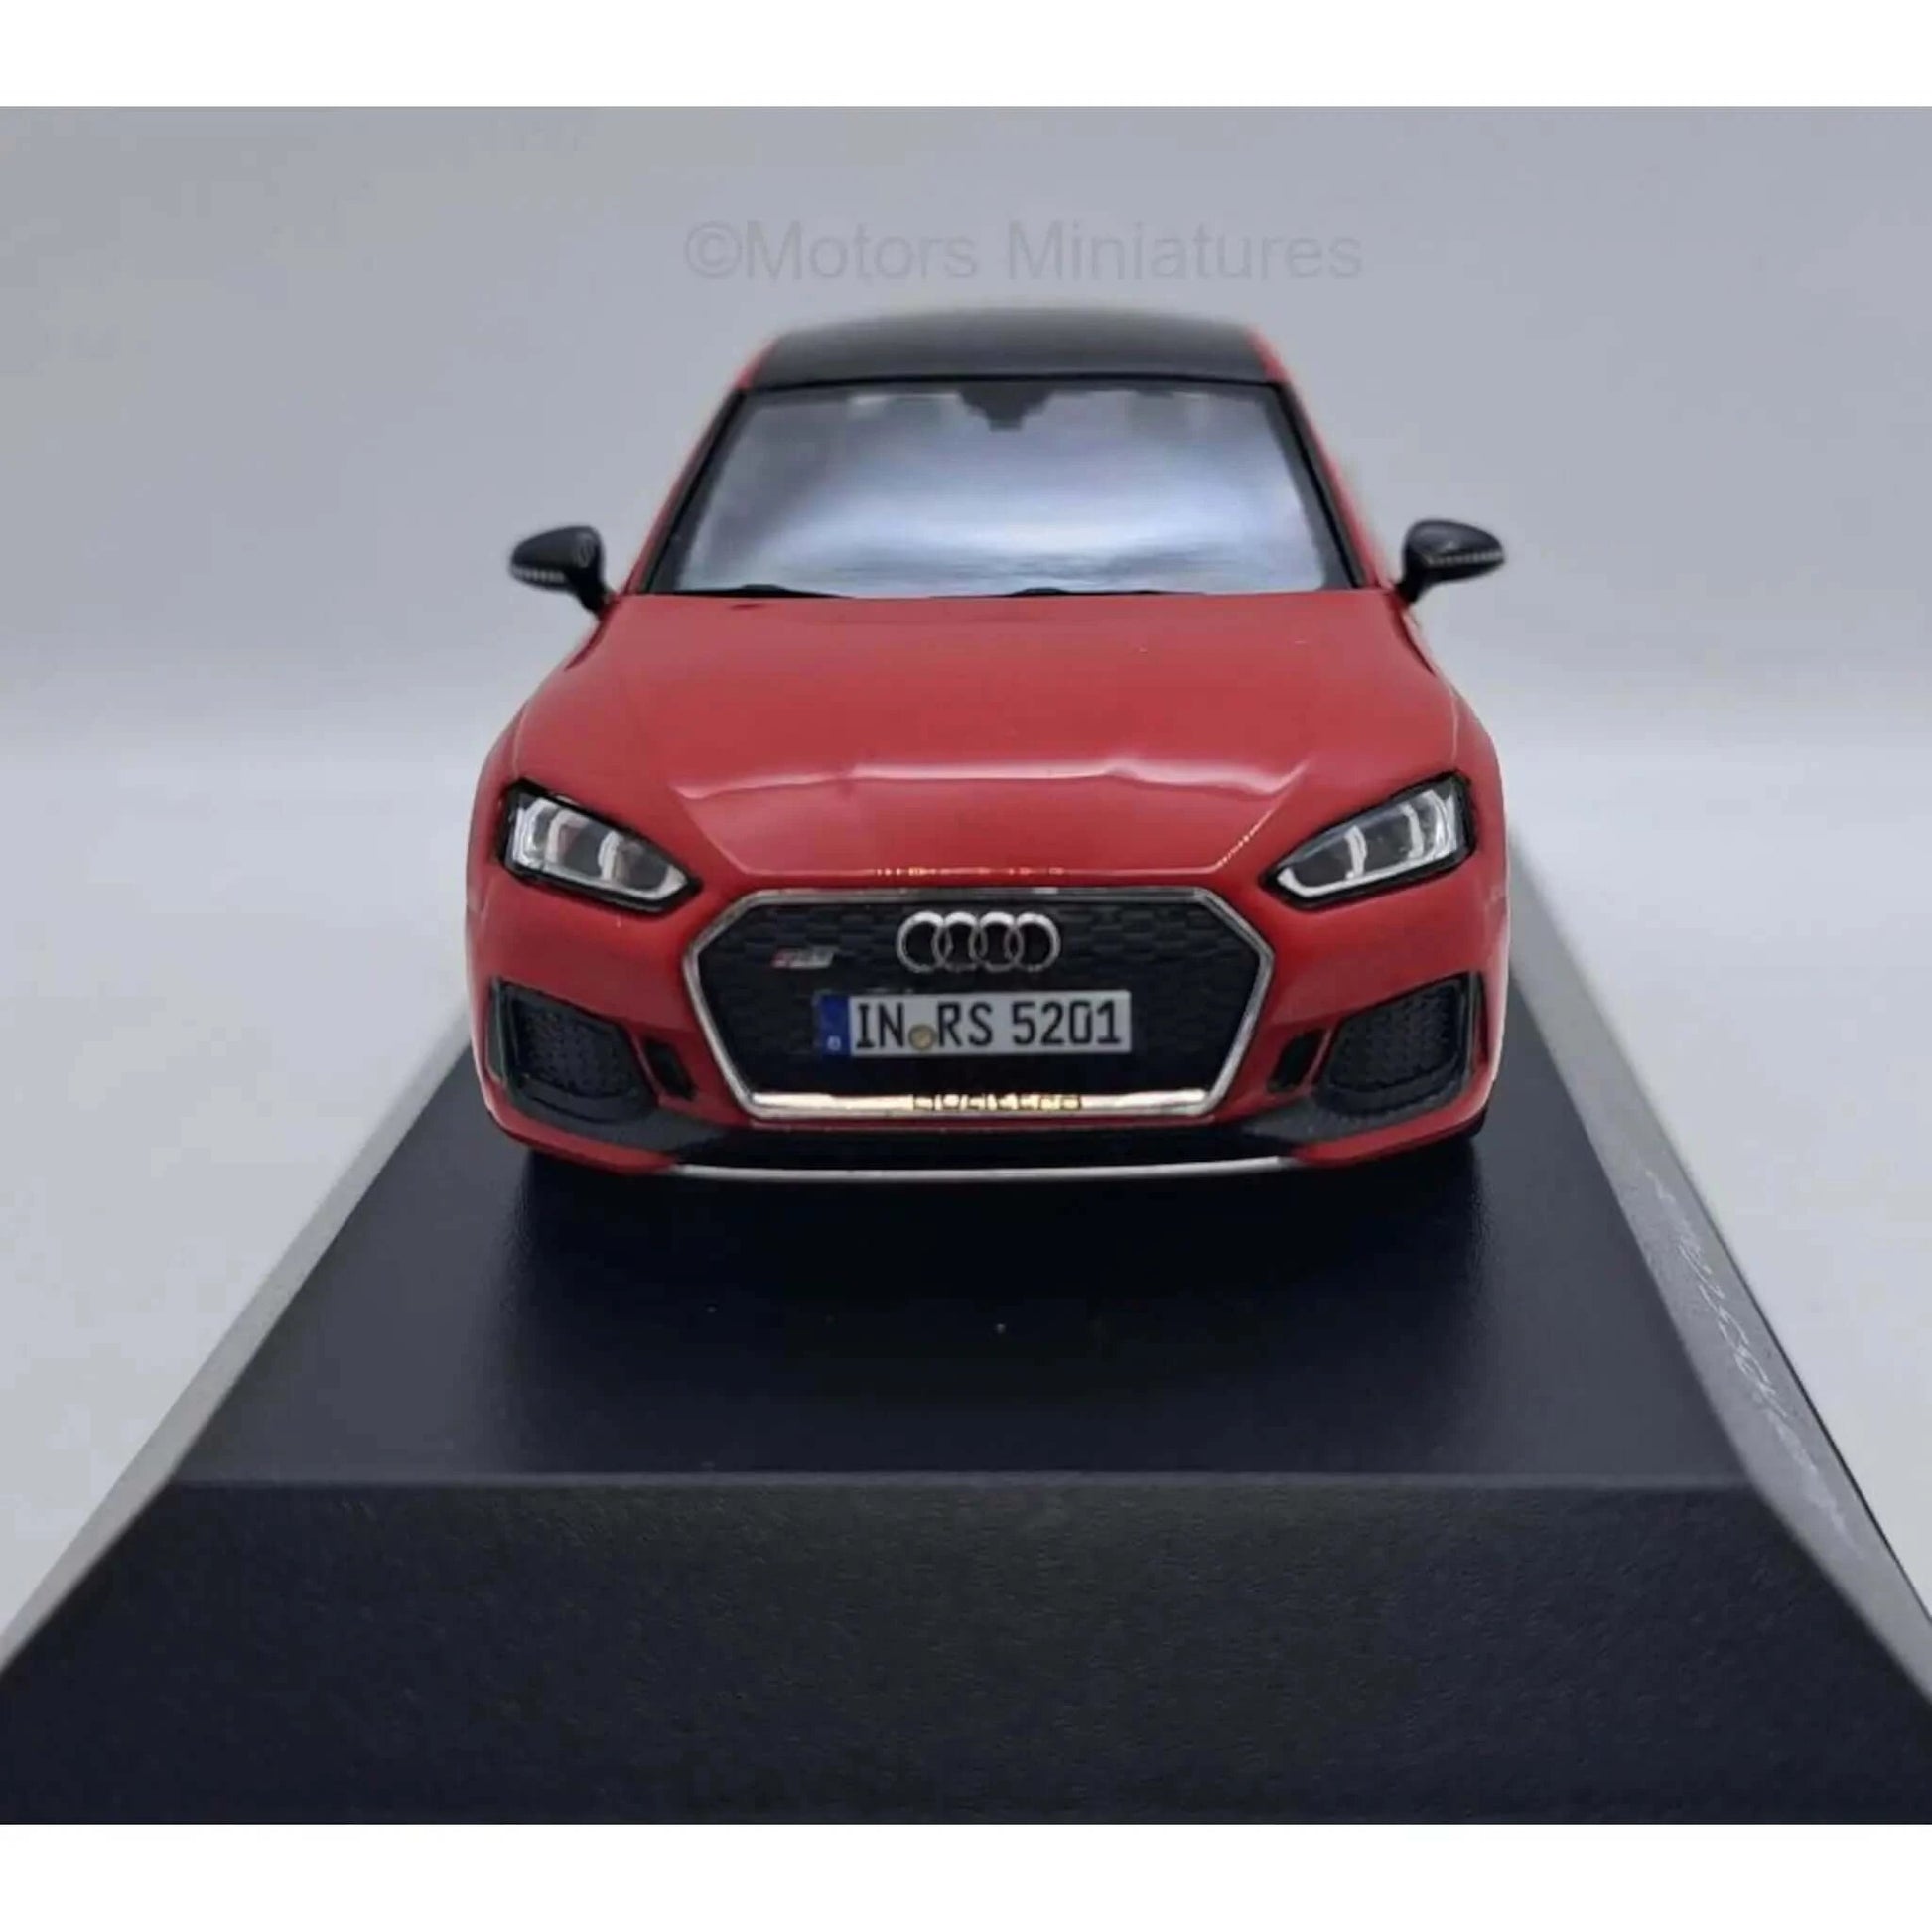 Audi RS5 Coupe Misano Red 2017 iScale 1/43 - Audi5011715031